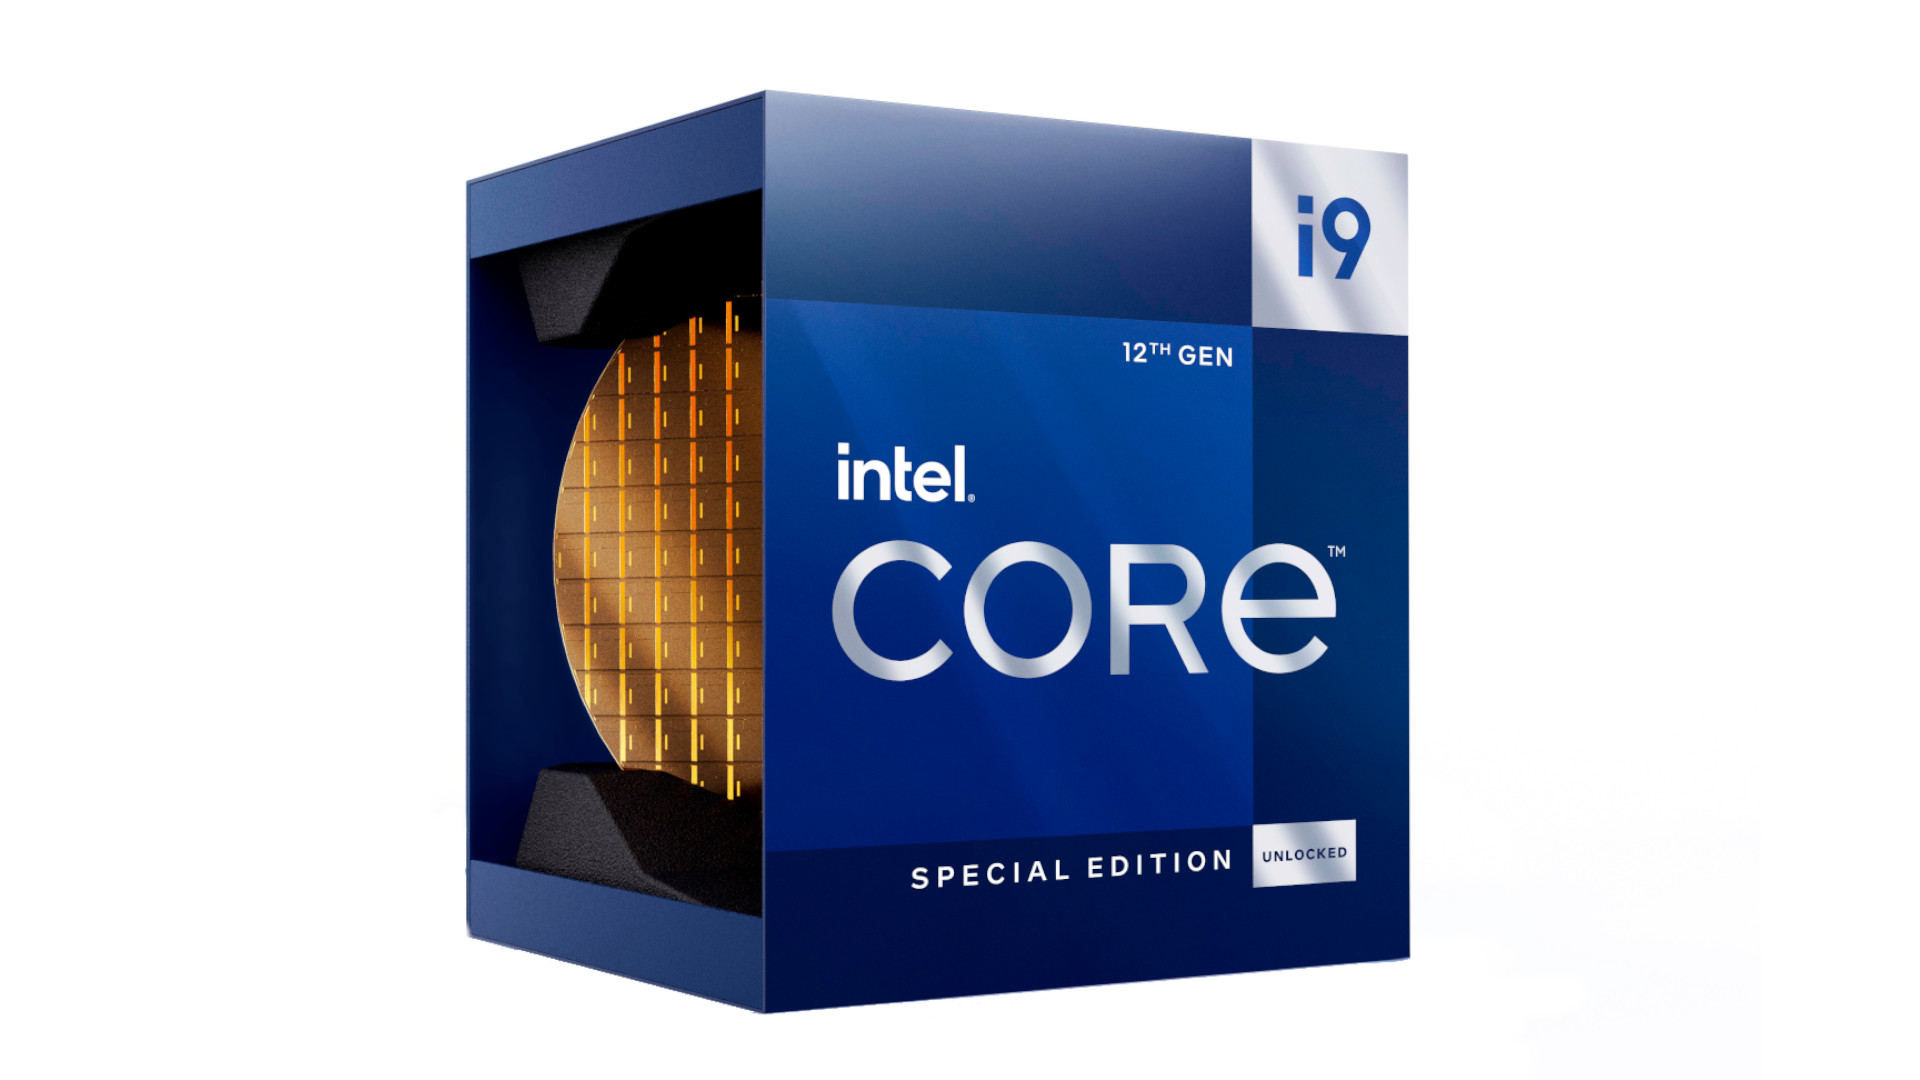 The most powerful Intel CPU is the Intel Core i9 12900KS